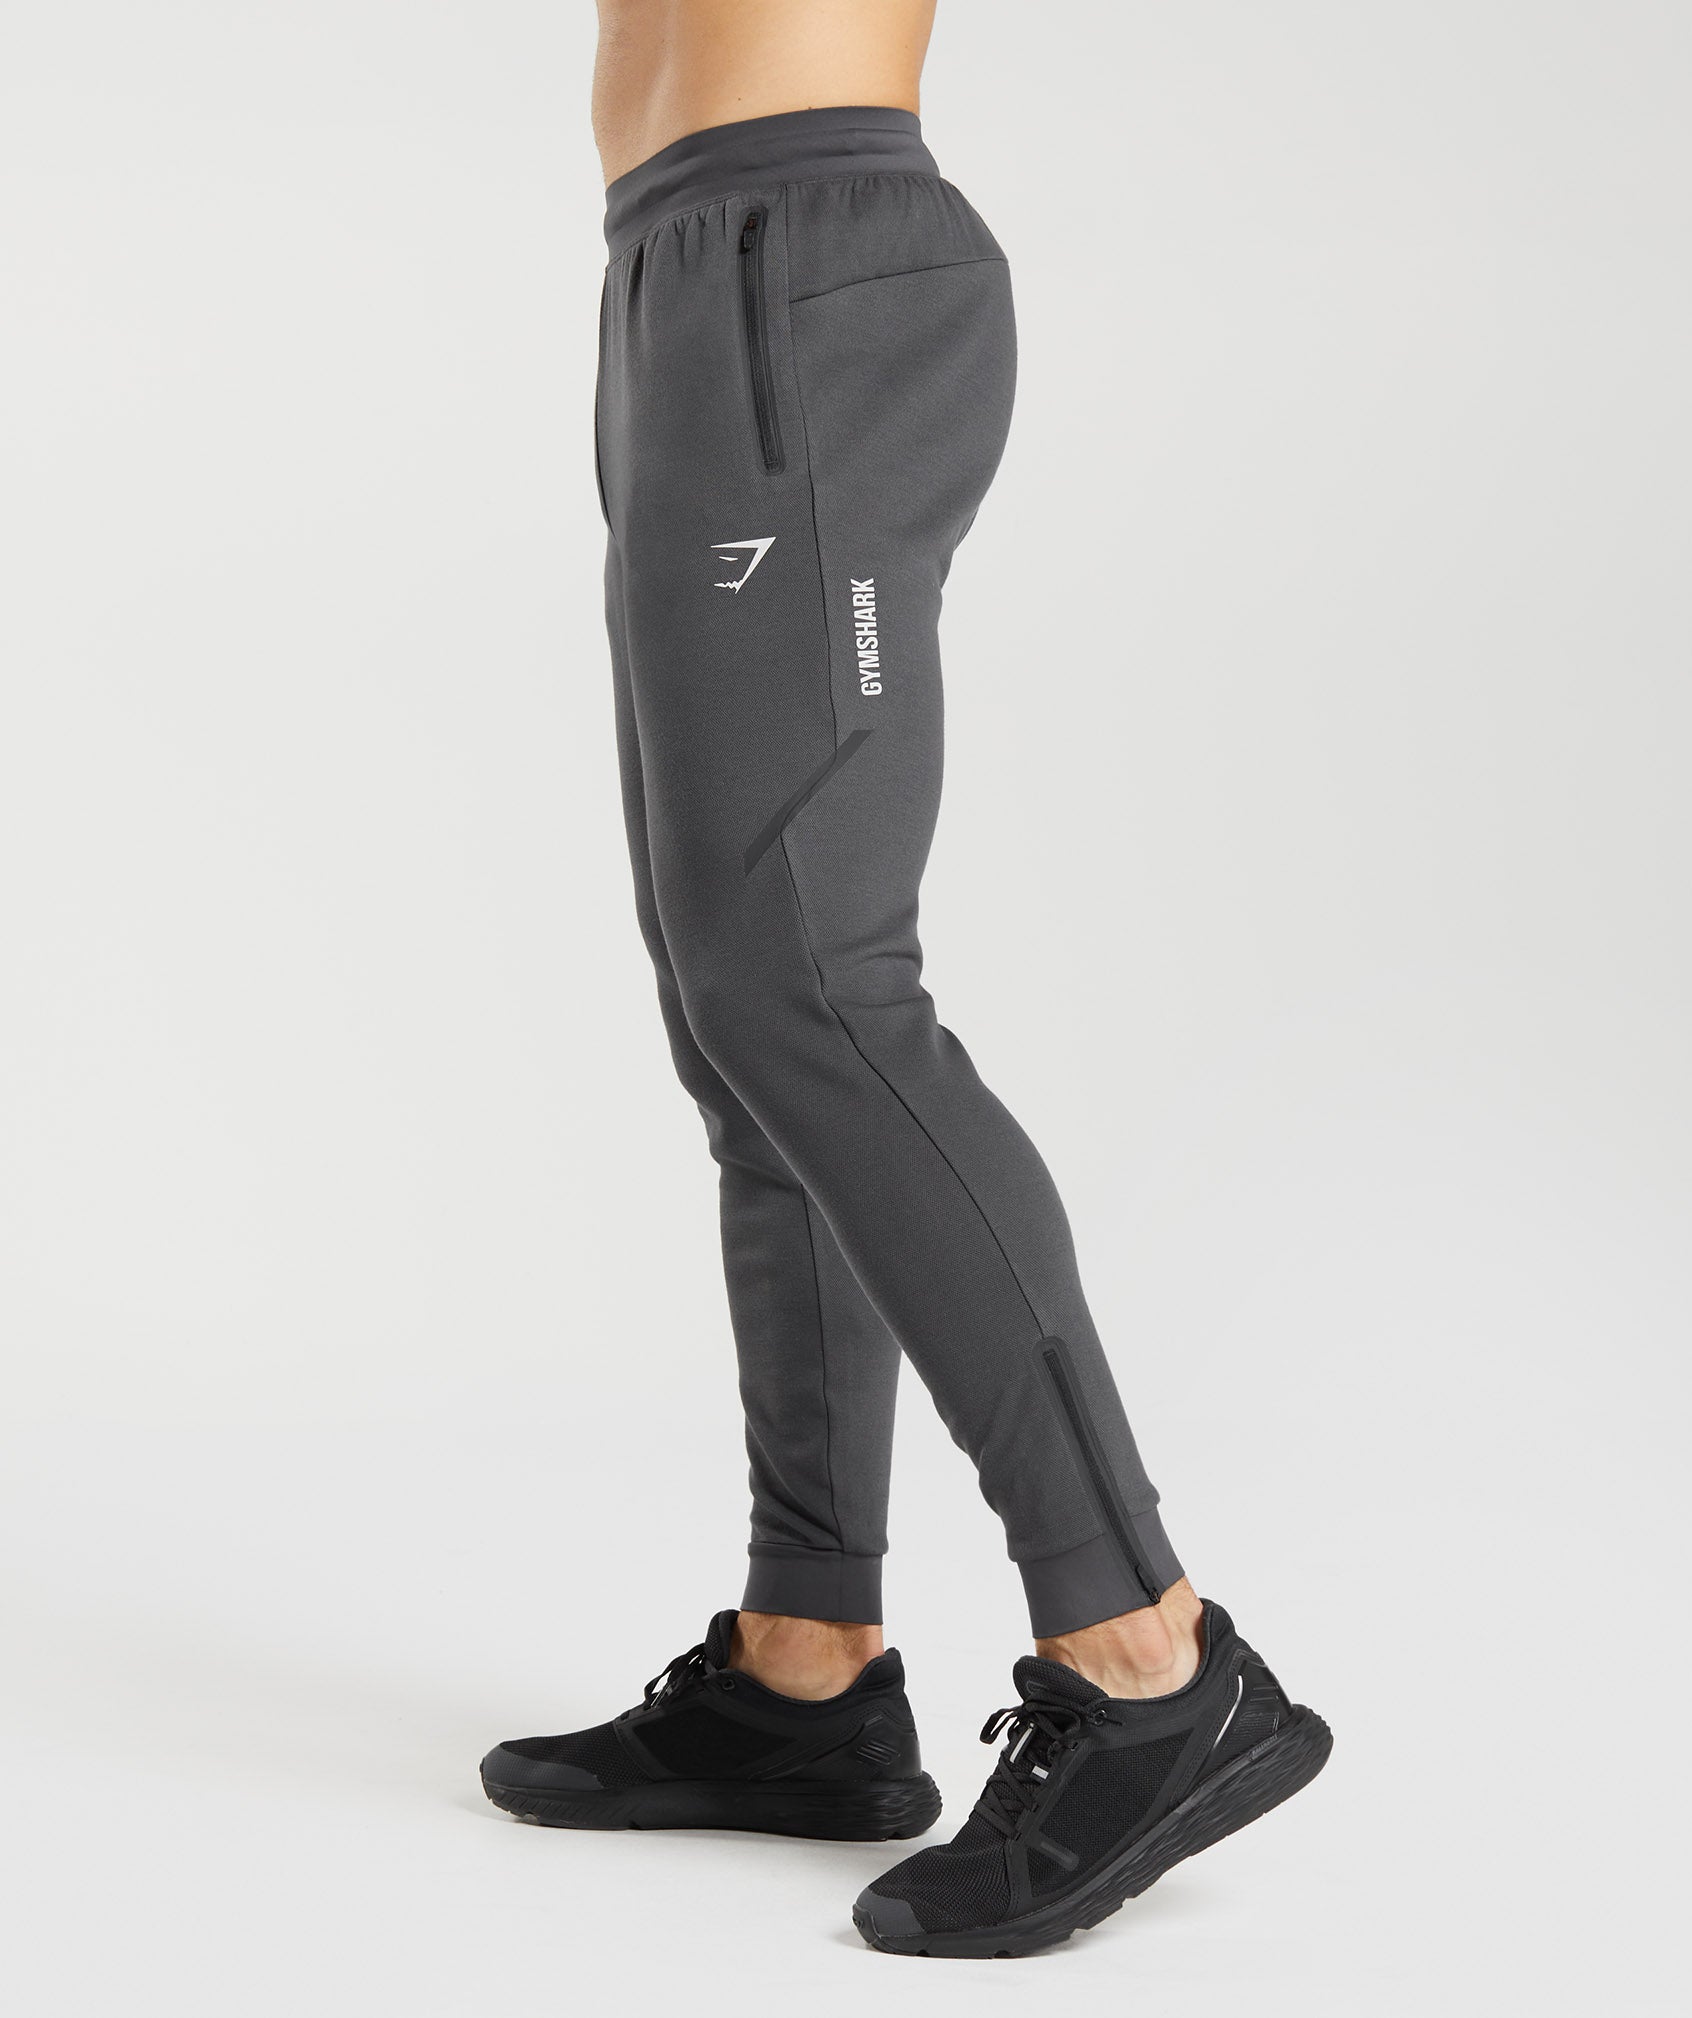 Apex Technical Joggers in Onyx Grey - view 3